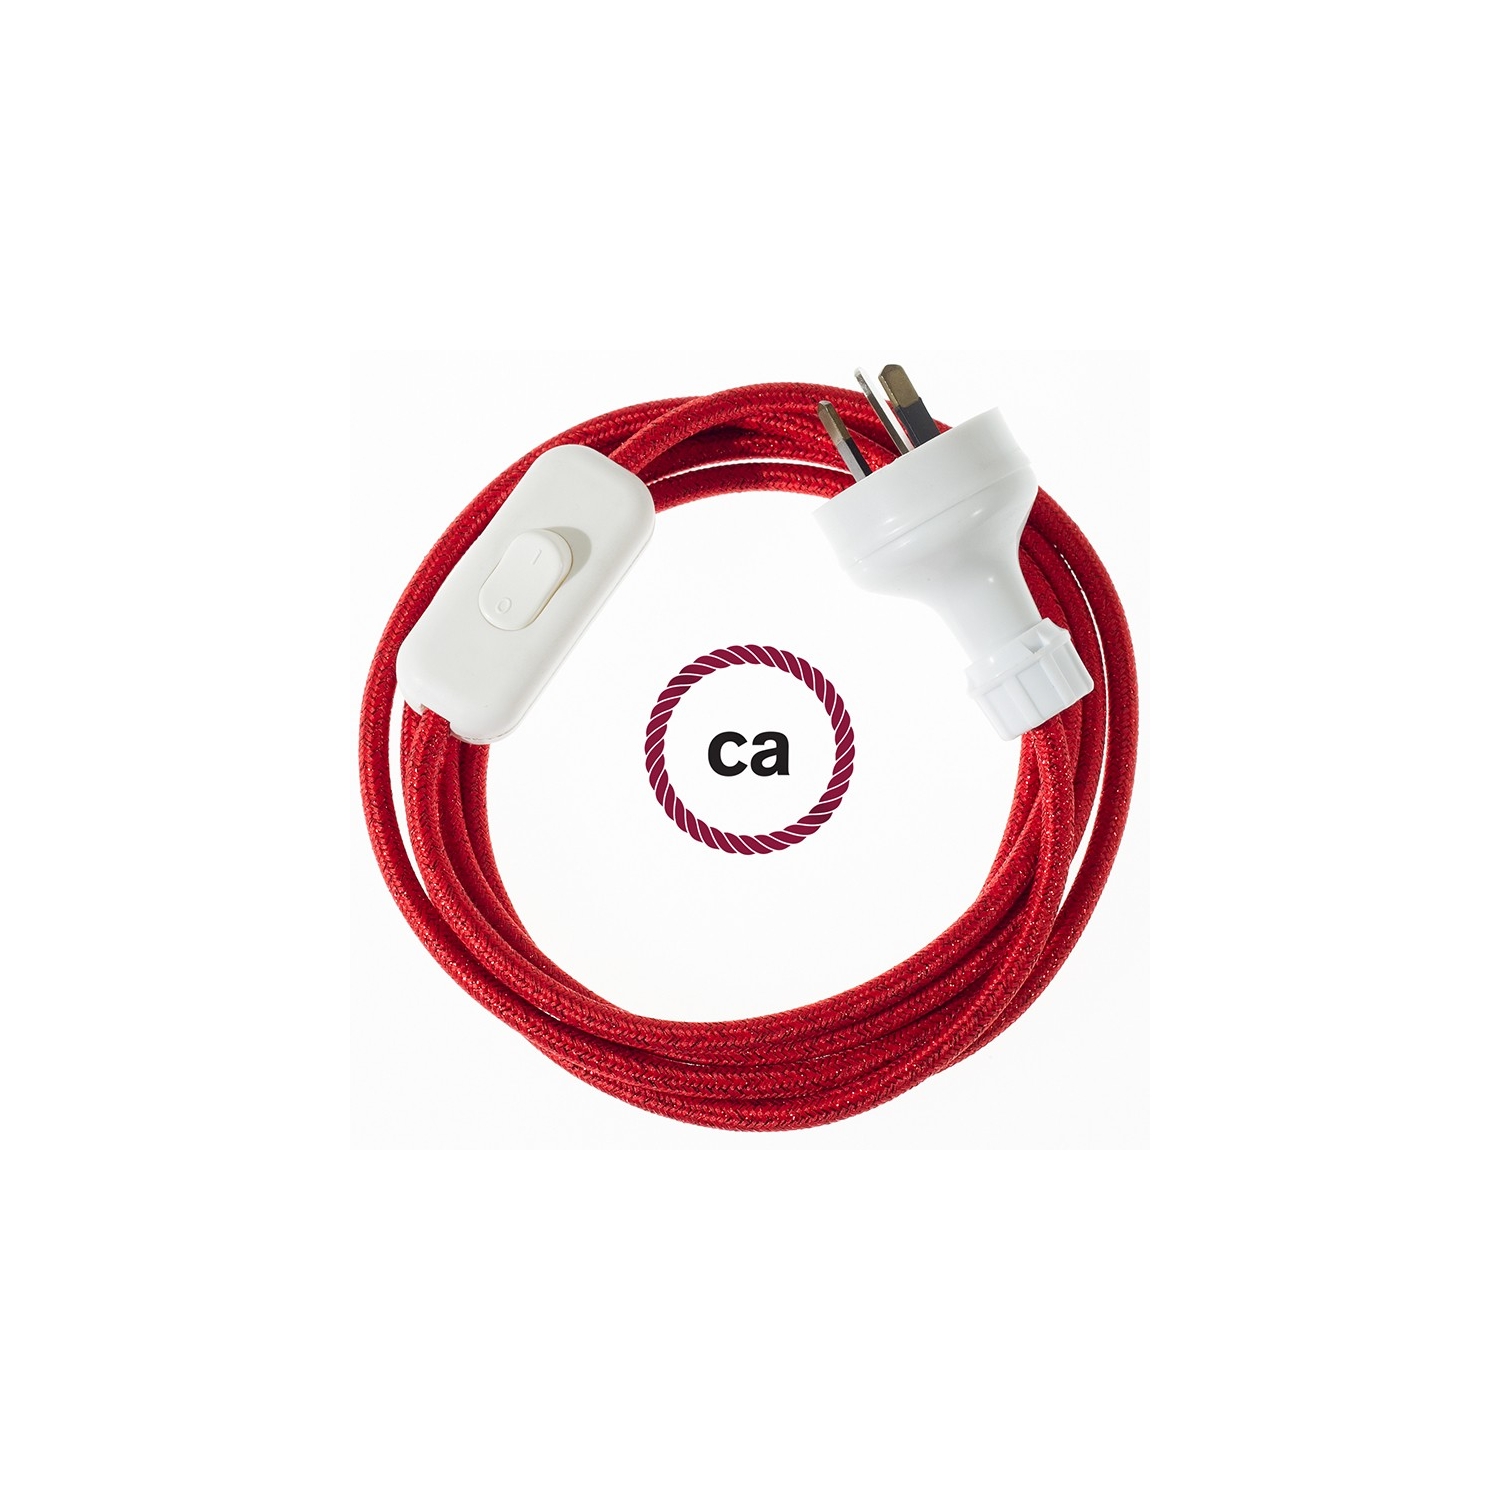 Wiring Glittering Red textile cable RL09 - 1.80 mt